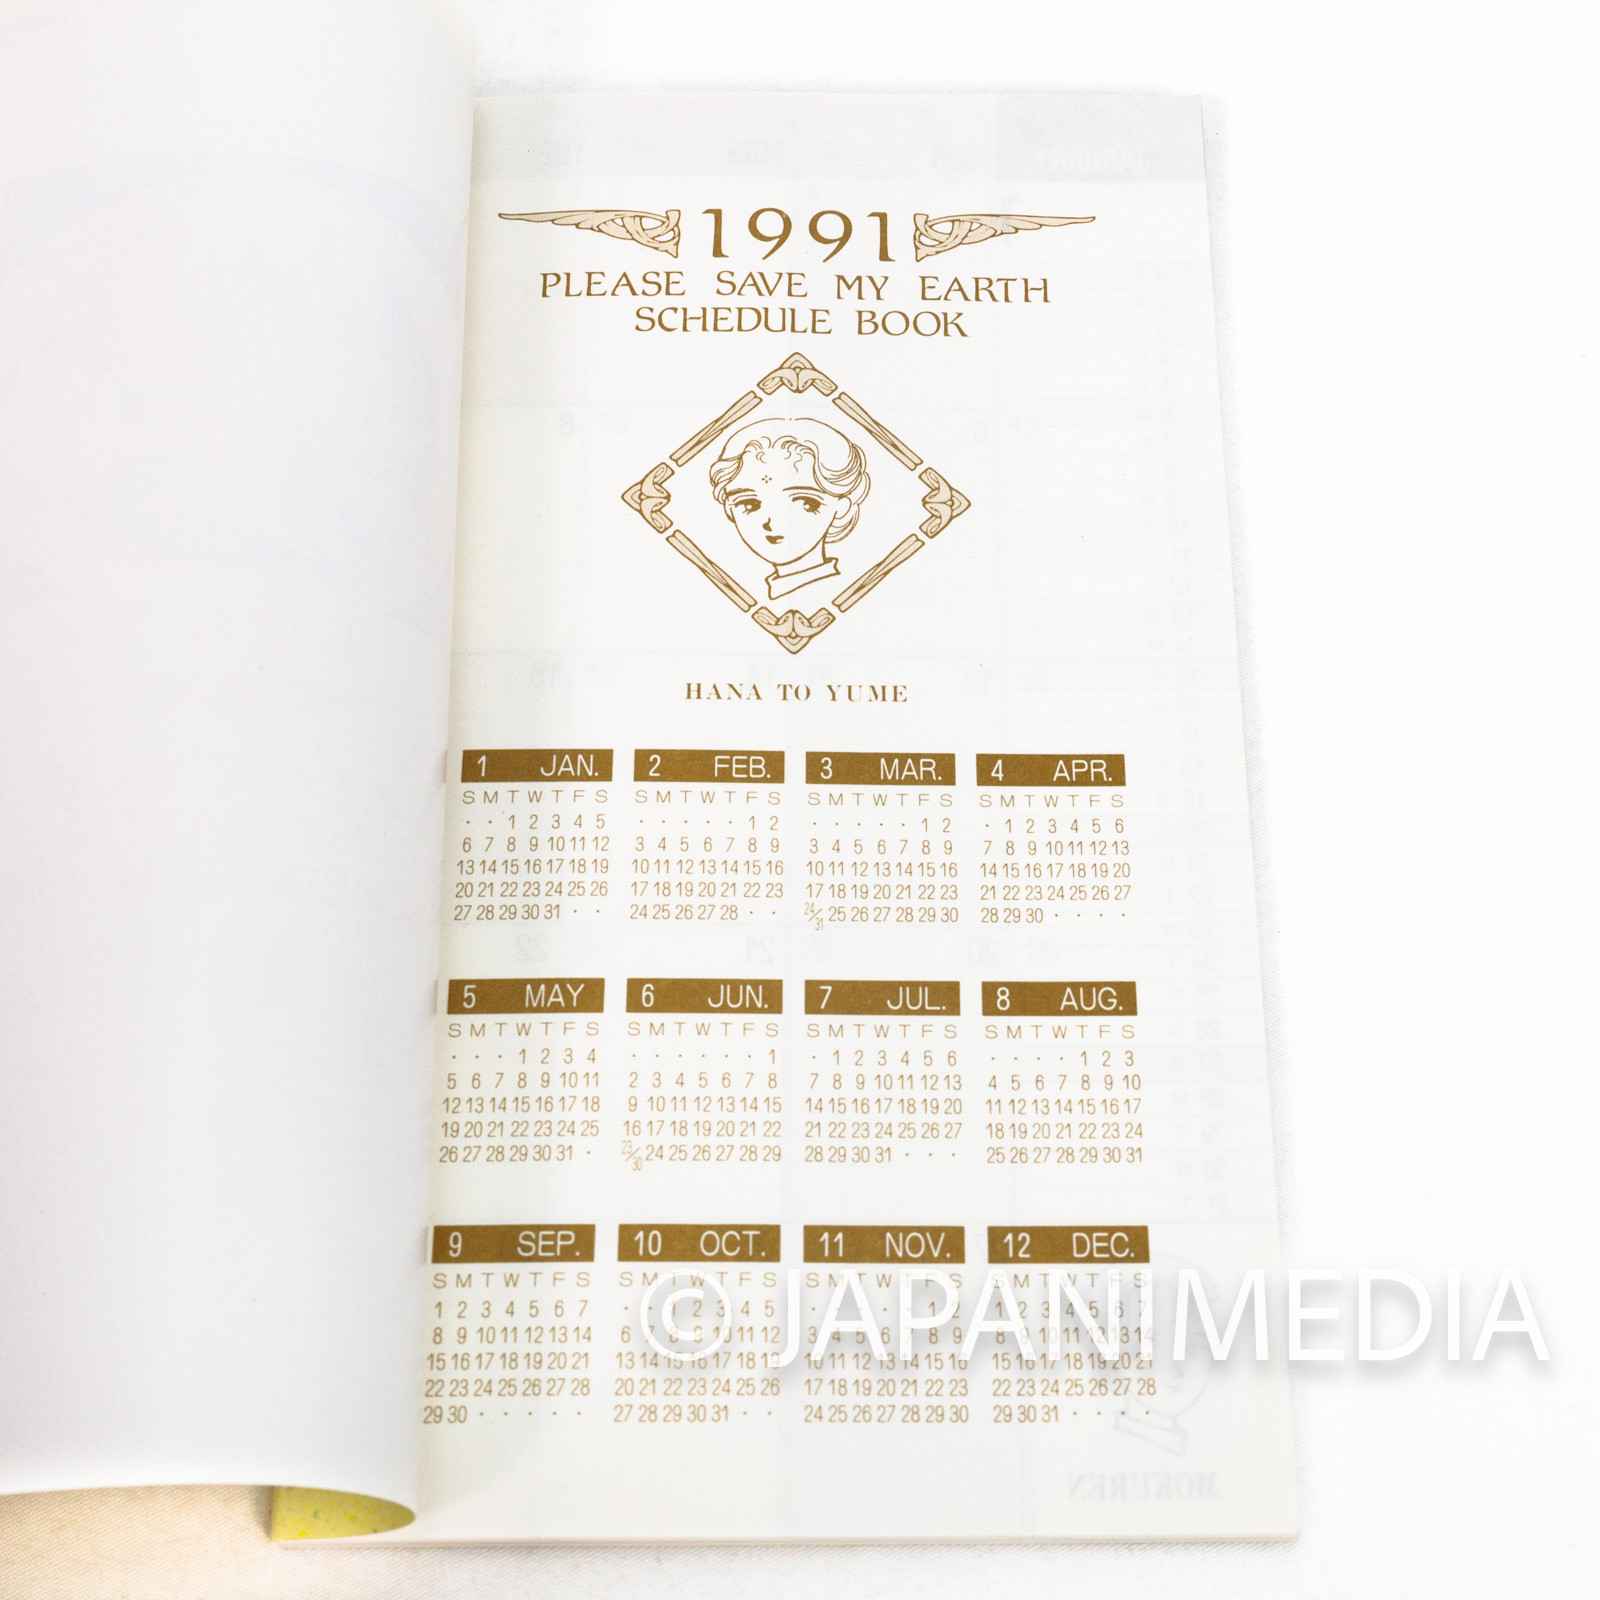 Please Save My Earth 1991 Schedule Book (Planner) 